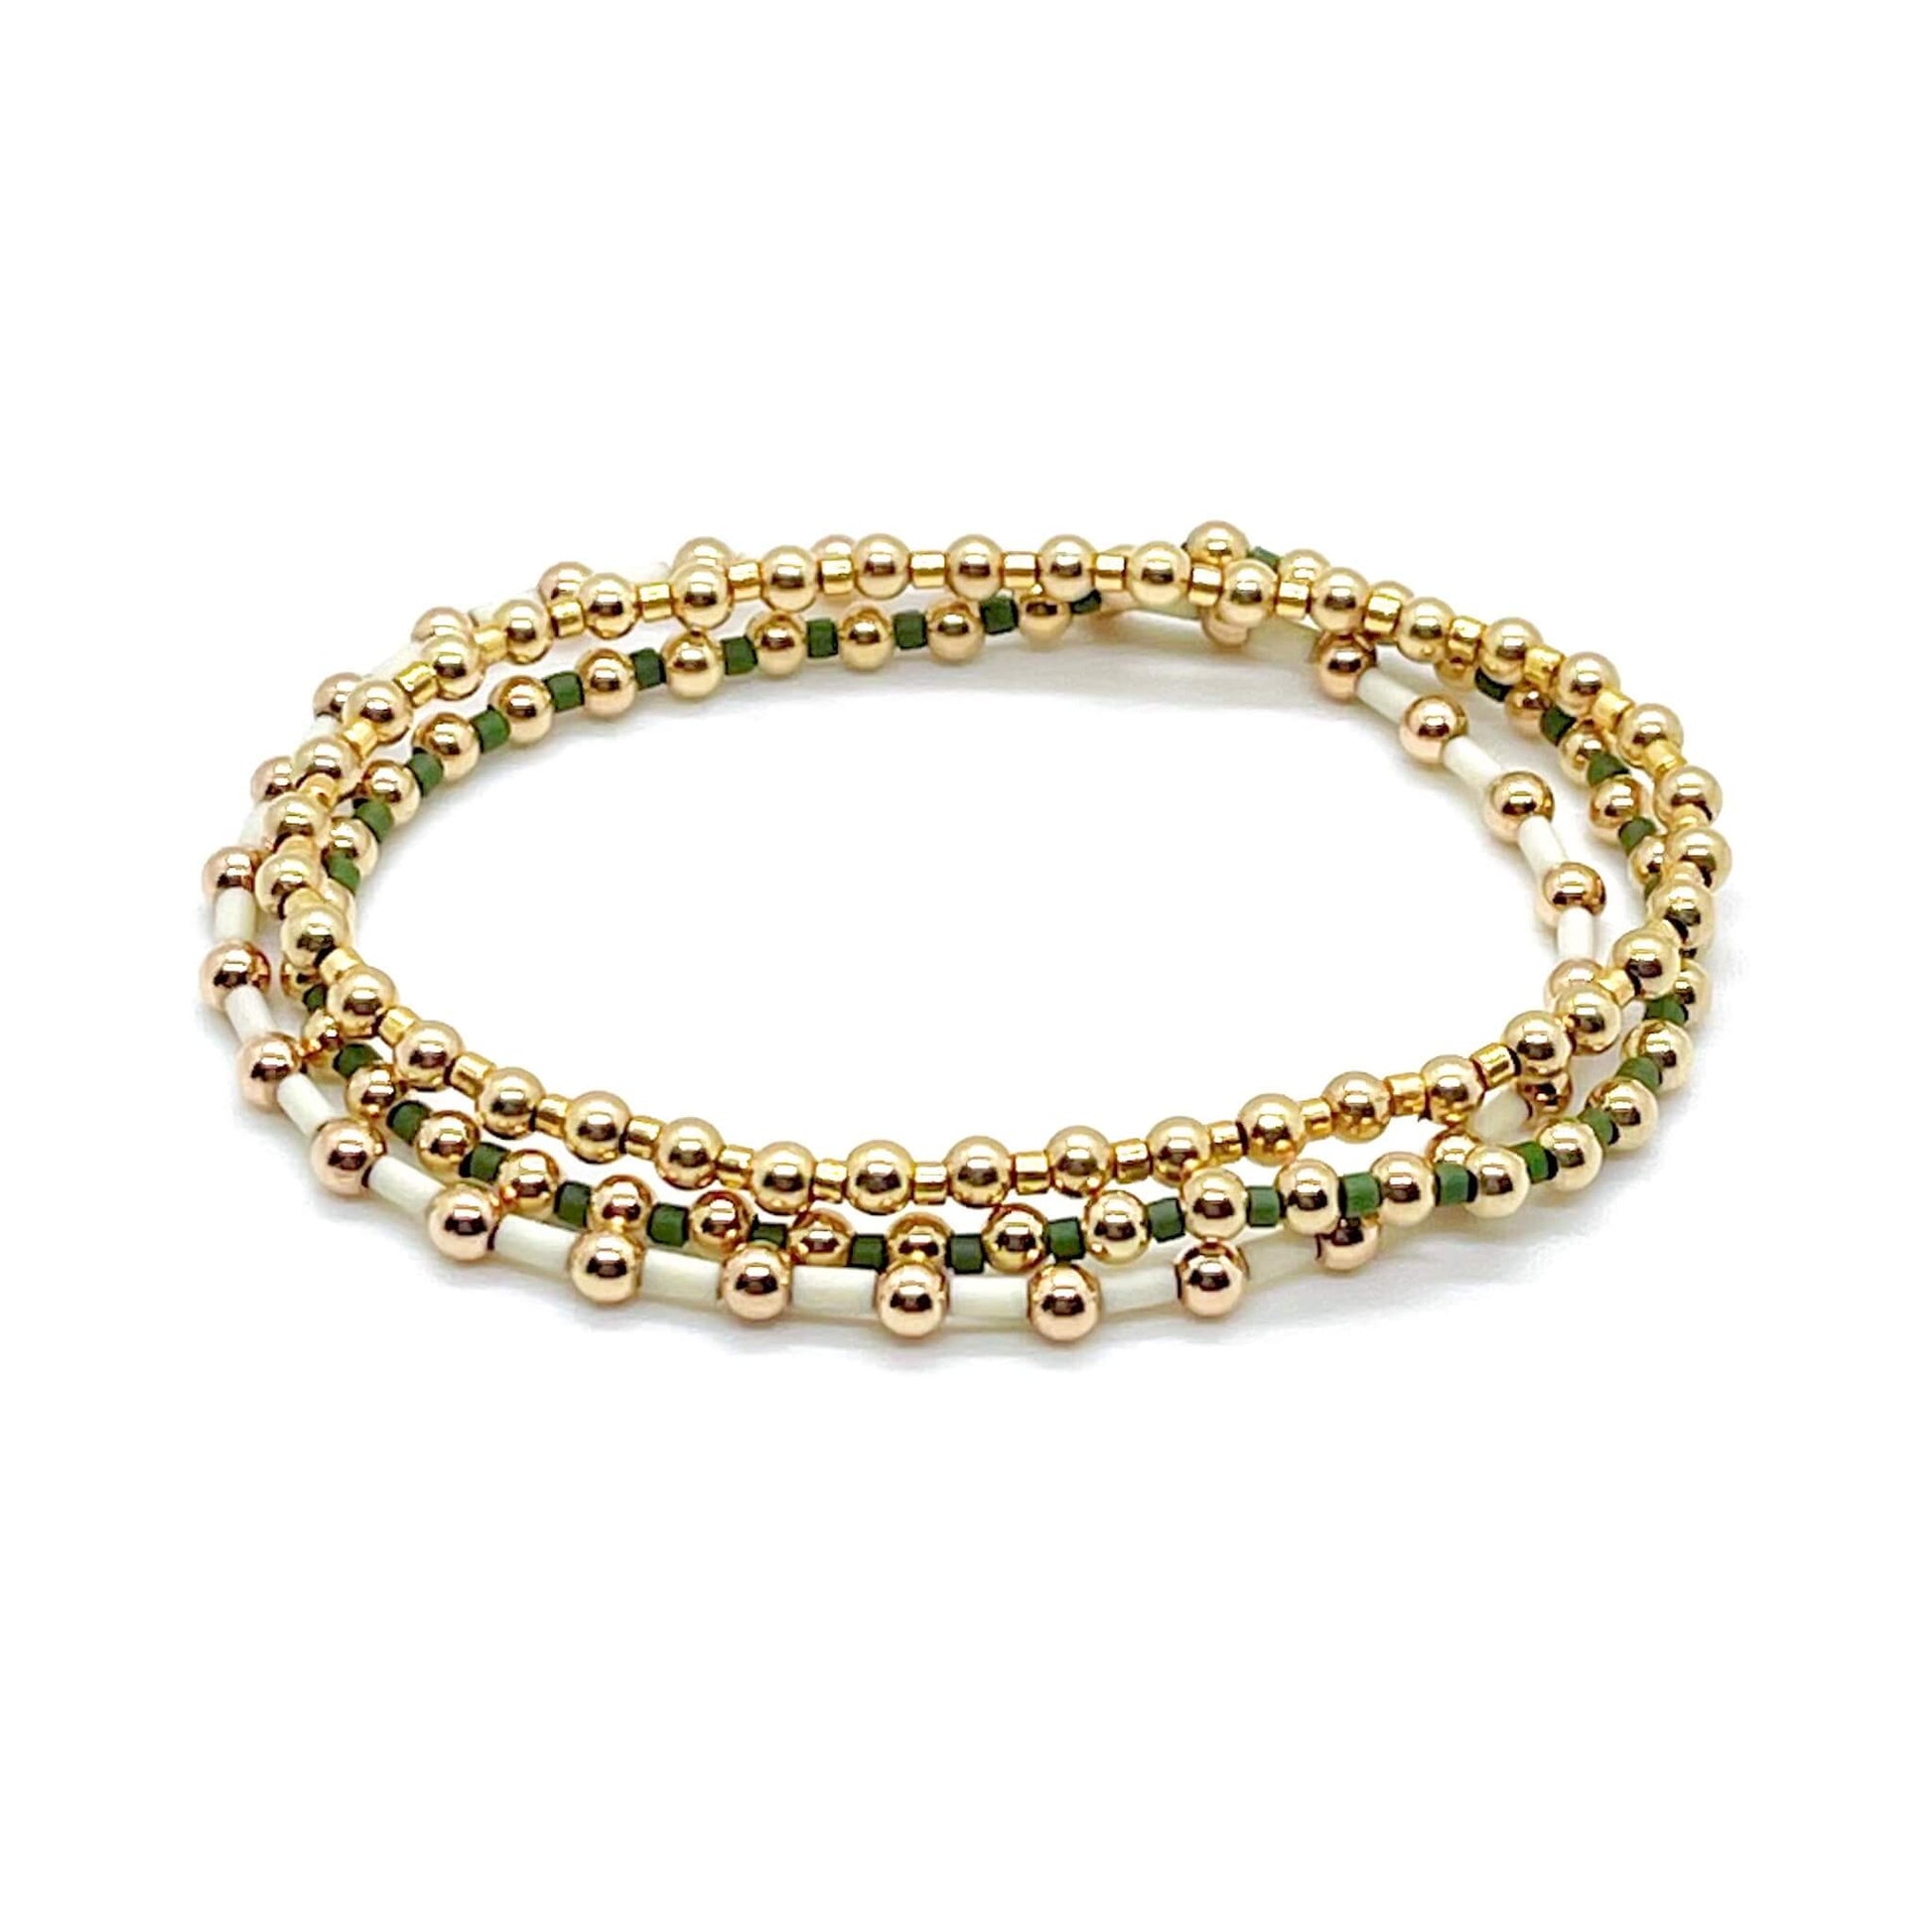 Delicate handmade 14K gold filled stretch bracelets with alternating green and ivory tiny glass seed beads.